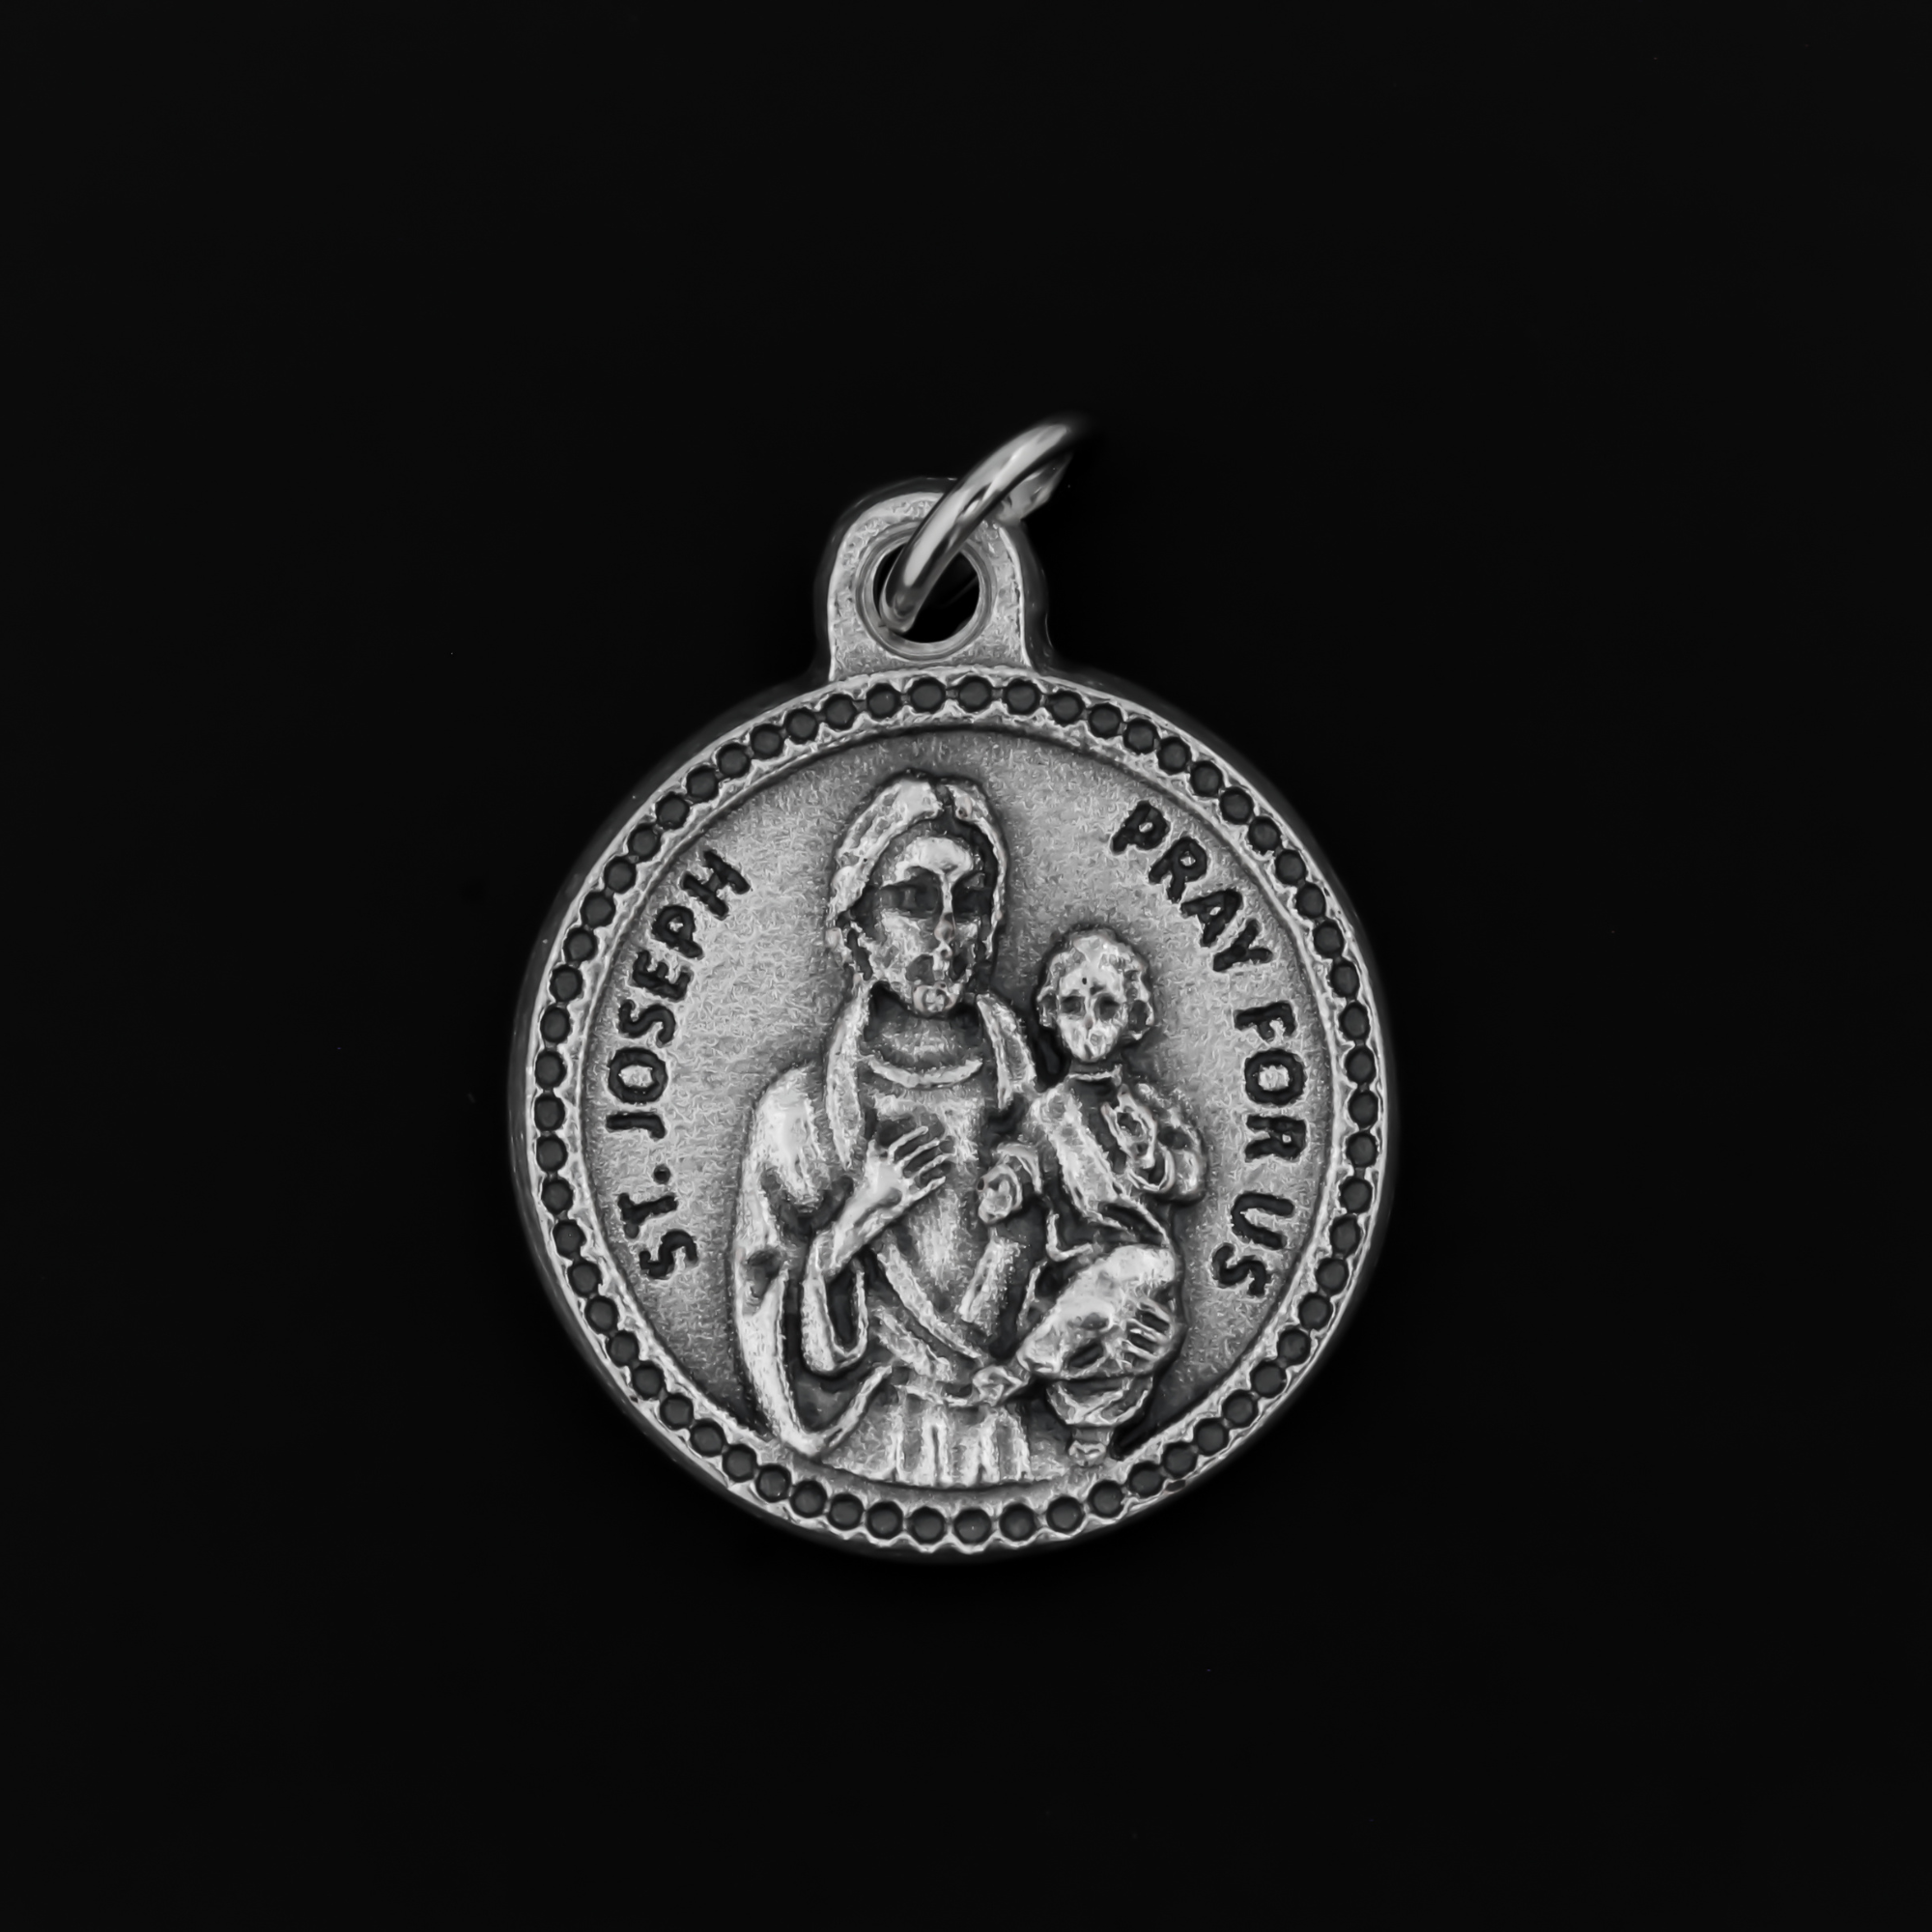 Saint Joseph medal that is round in shape